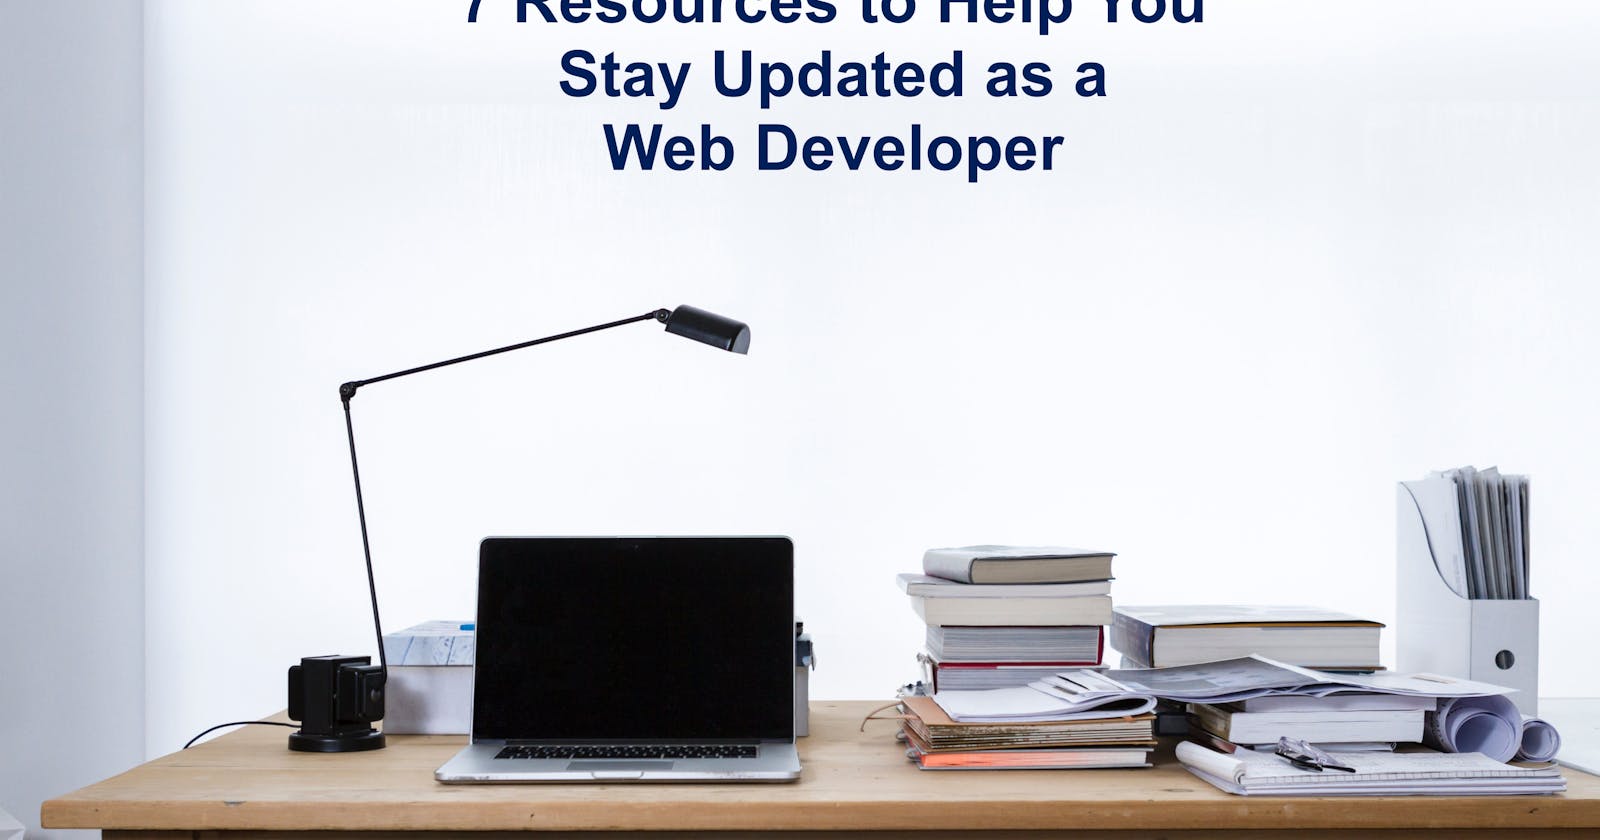 7 Resources to Help You Stay Updated as a Web Developer